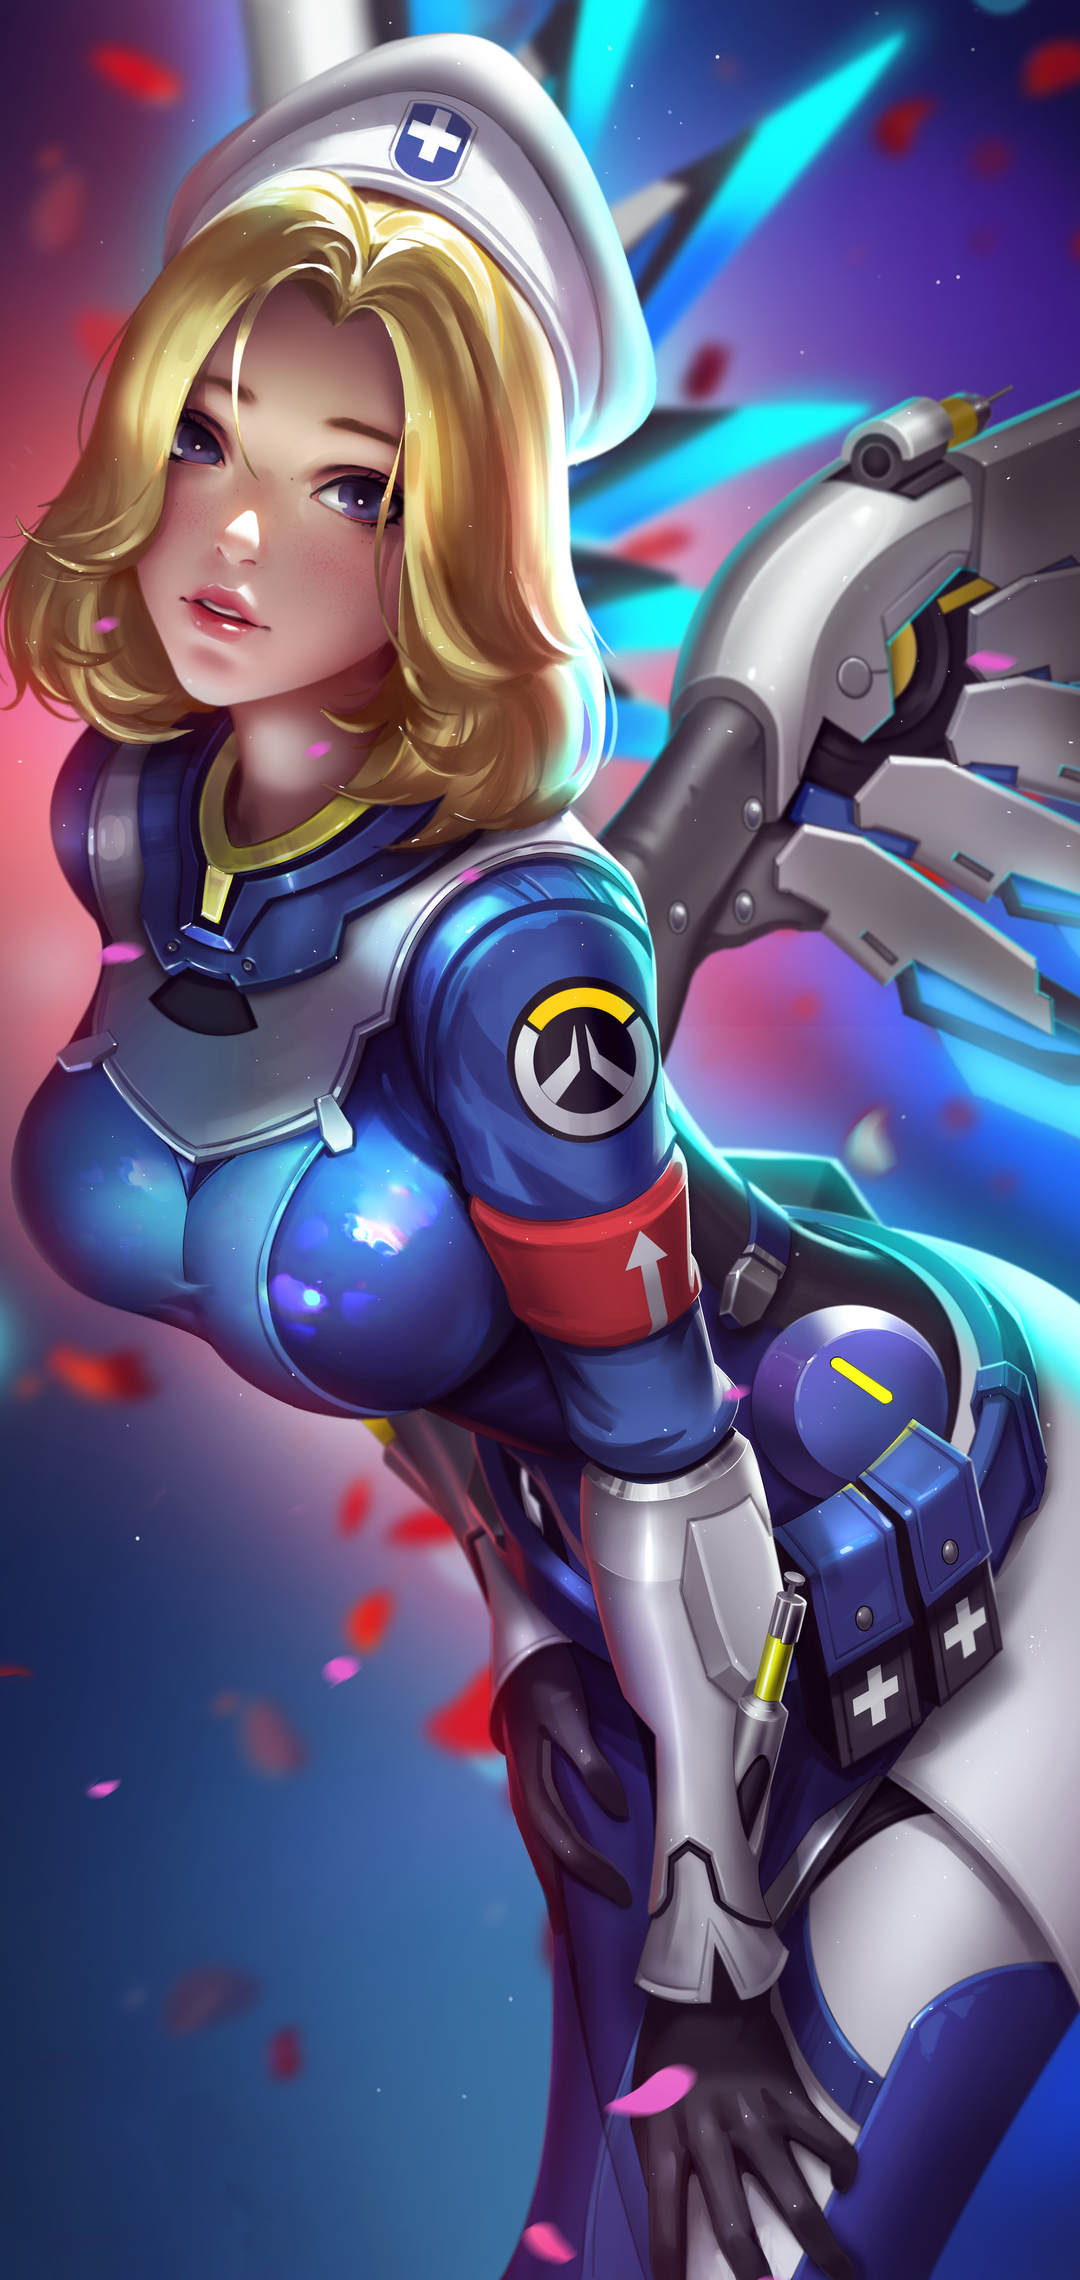 1080x2280 Mercy Overwatch High Resolution 5k One Plus 6 Huawei P20 Honor View 10 Vivo Y85 Oppo F7 Xiaomi Mi A2 Hd 4k Wallpapers Images Backgrounds Photos And Pictures Aspect ratio widescreen high definition standard mobile dual monitor triple monitor. hdqwalls com